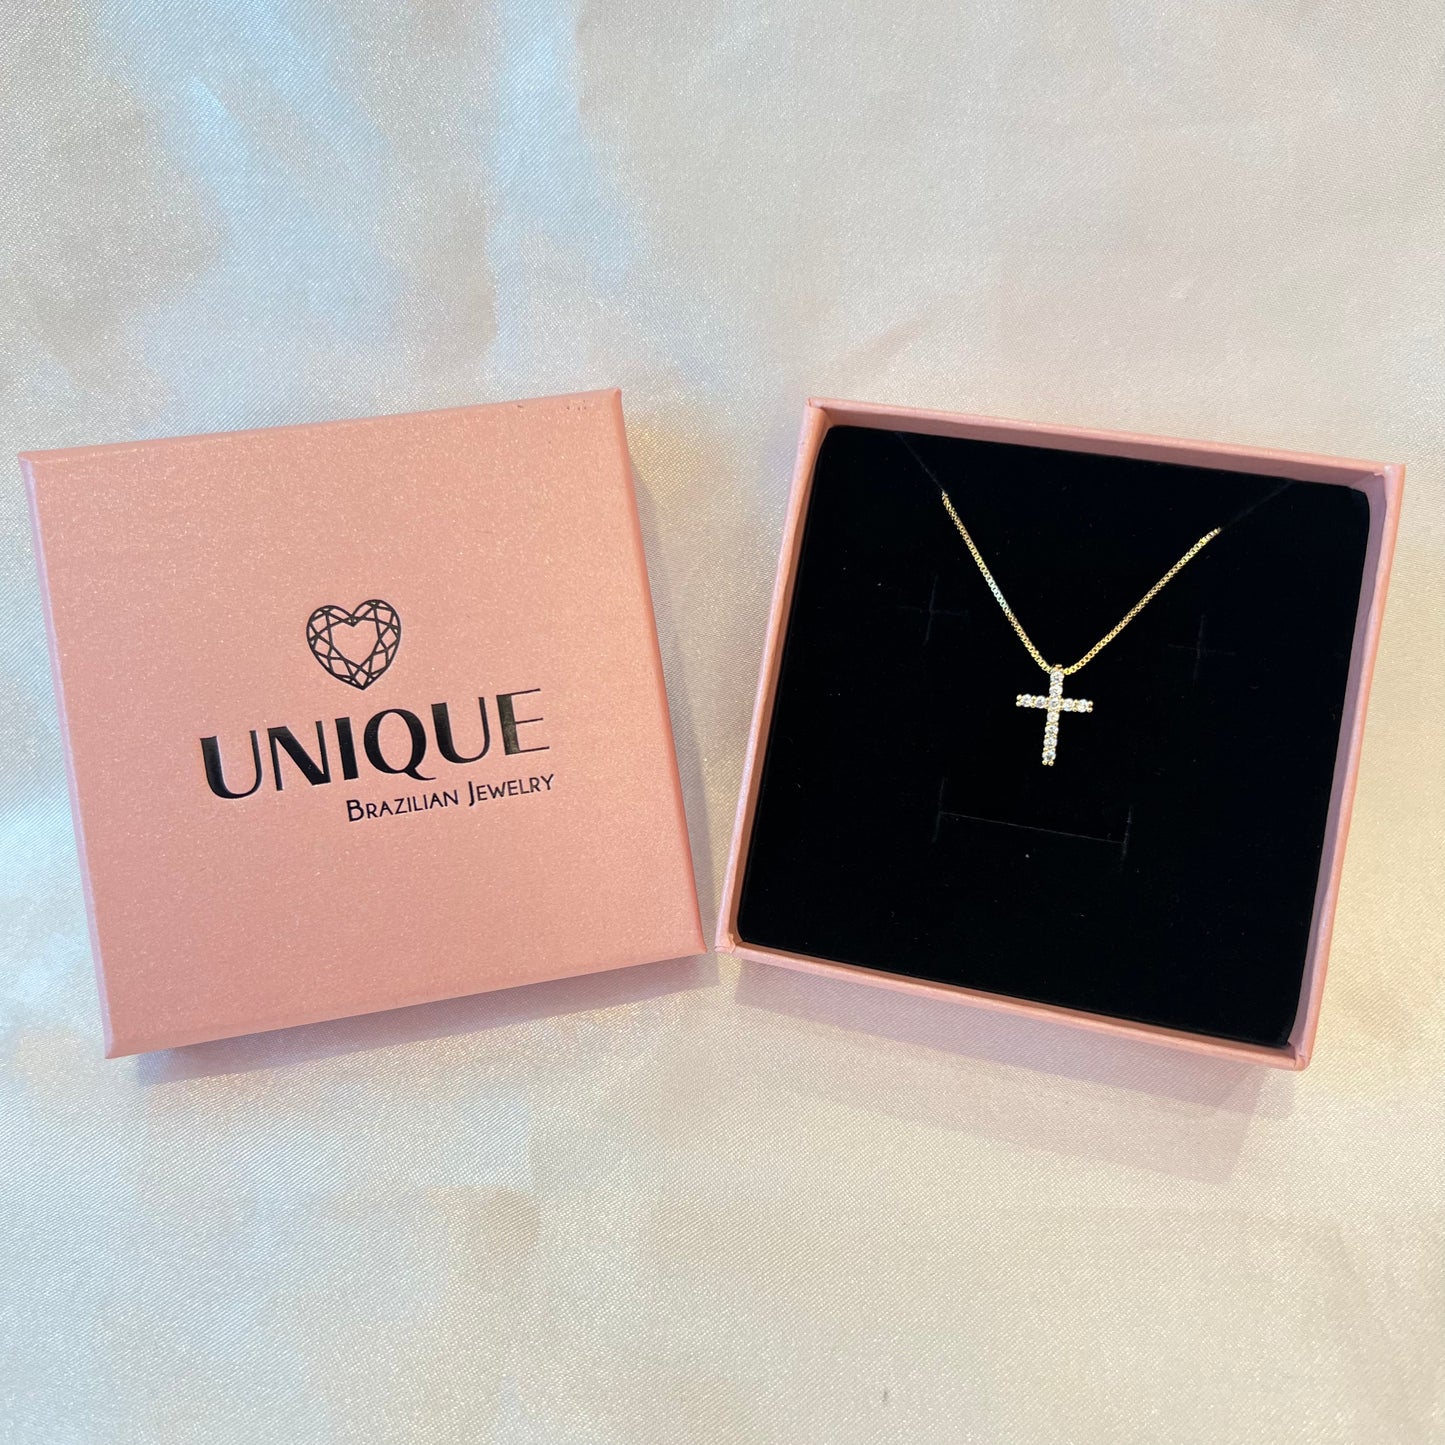 SMALL CROSS NECKLACE | Double 18K Gold Plated